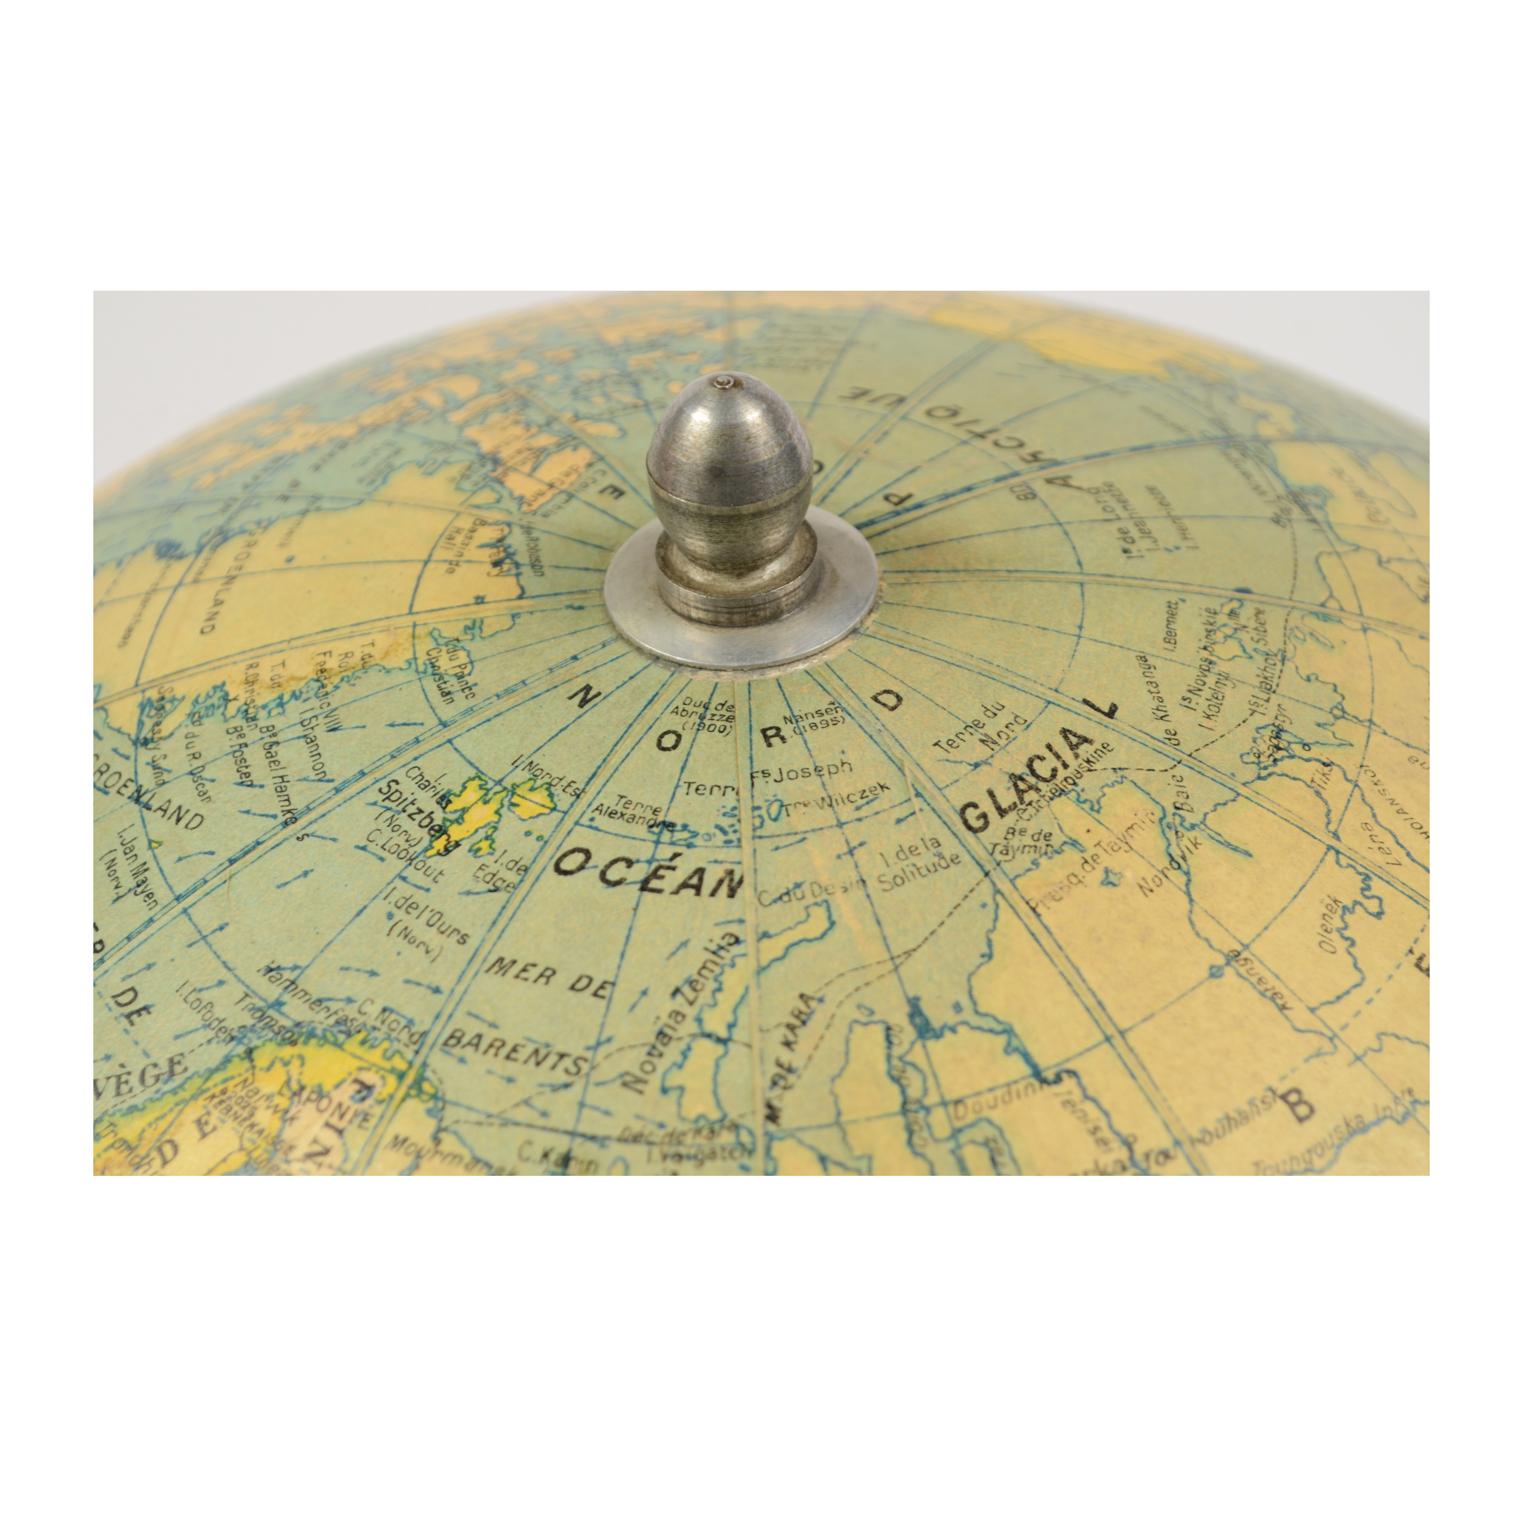 Antique Terrestrial Globe Published in 1940s by Girard Barrère et Thomas, Paris For Sale 4